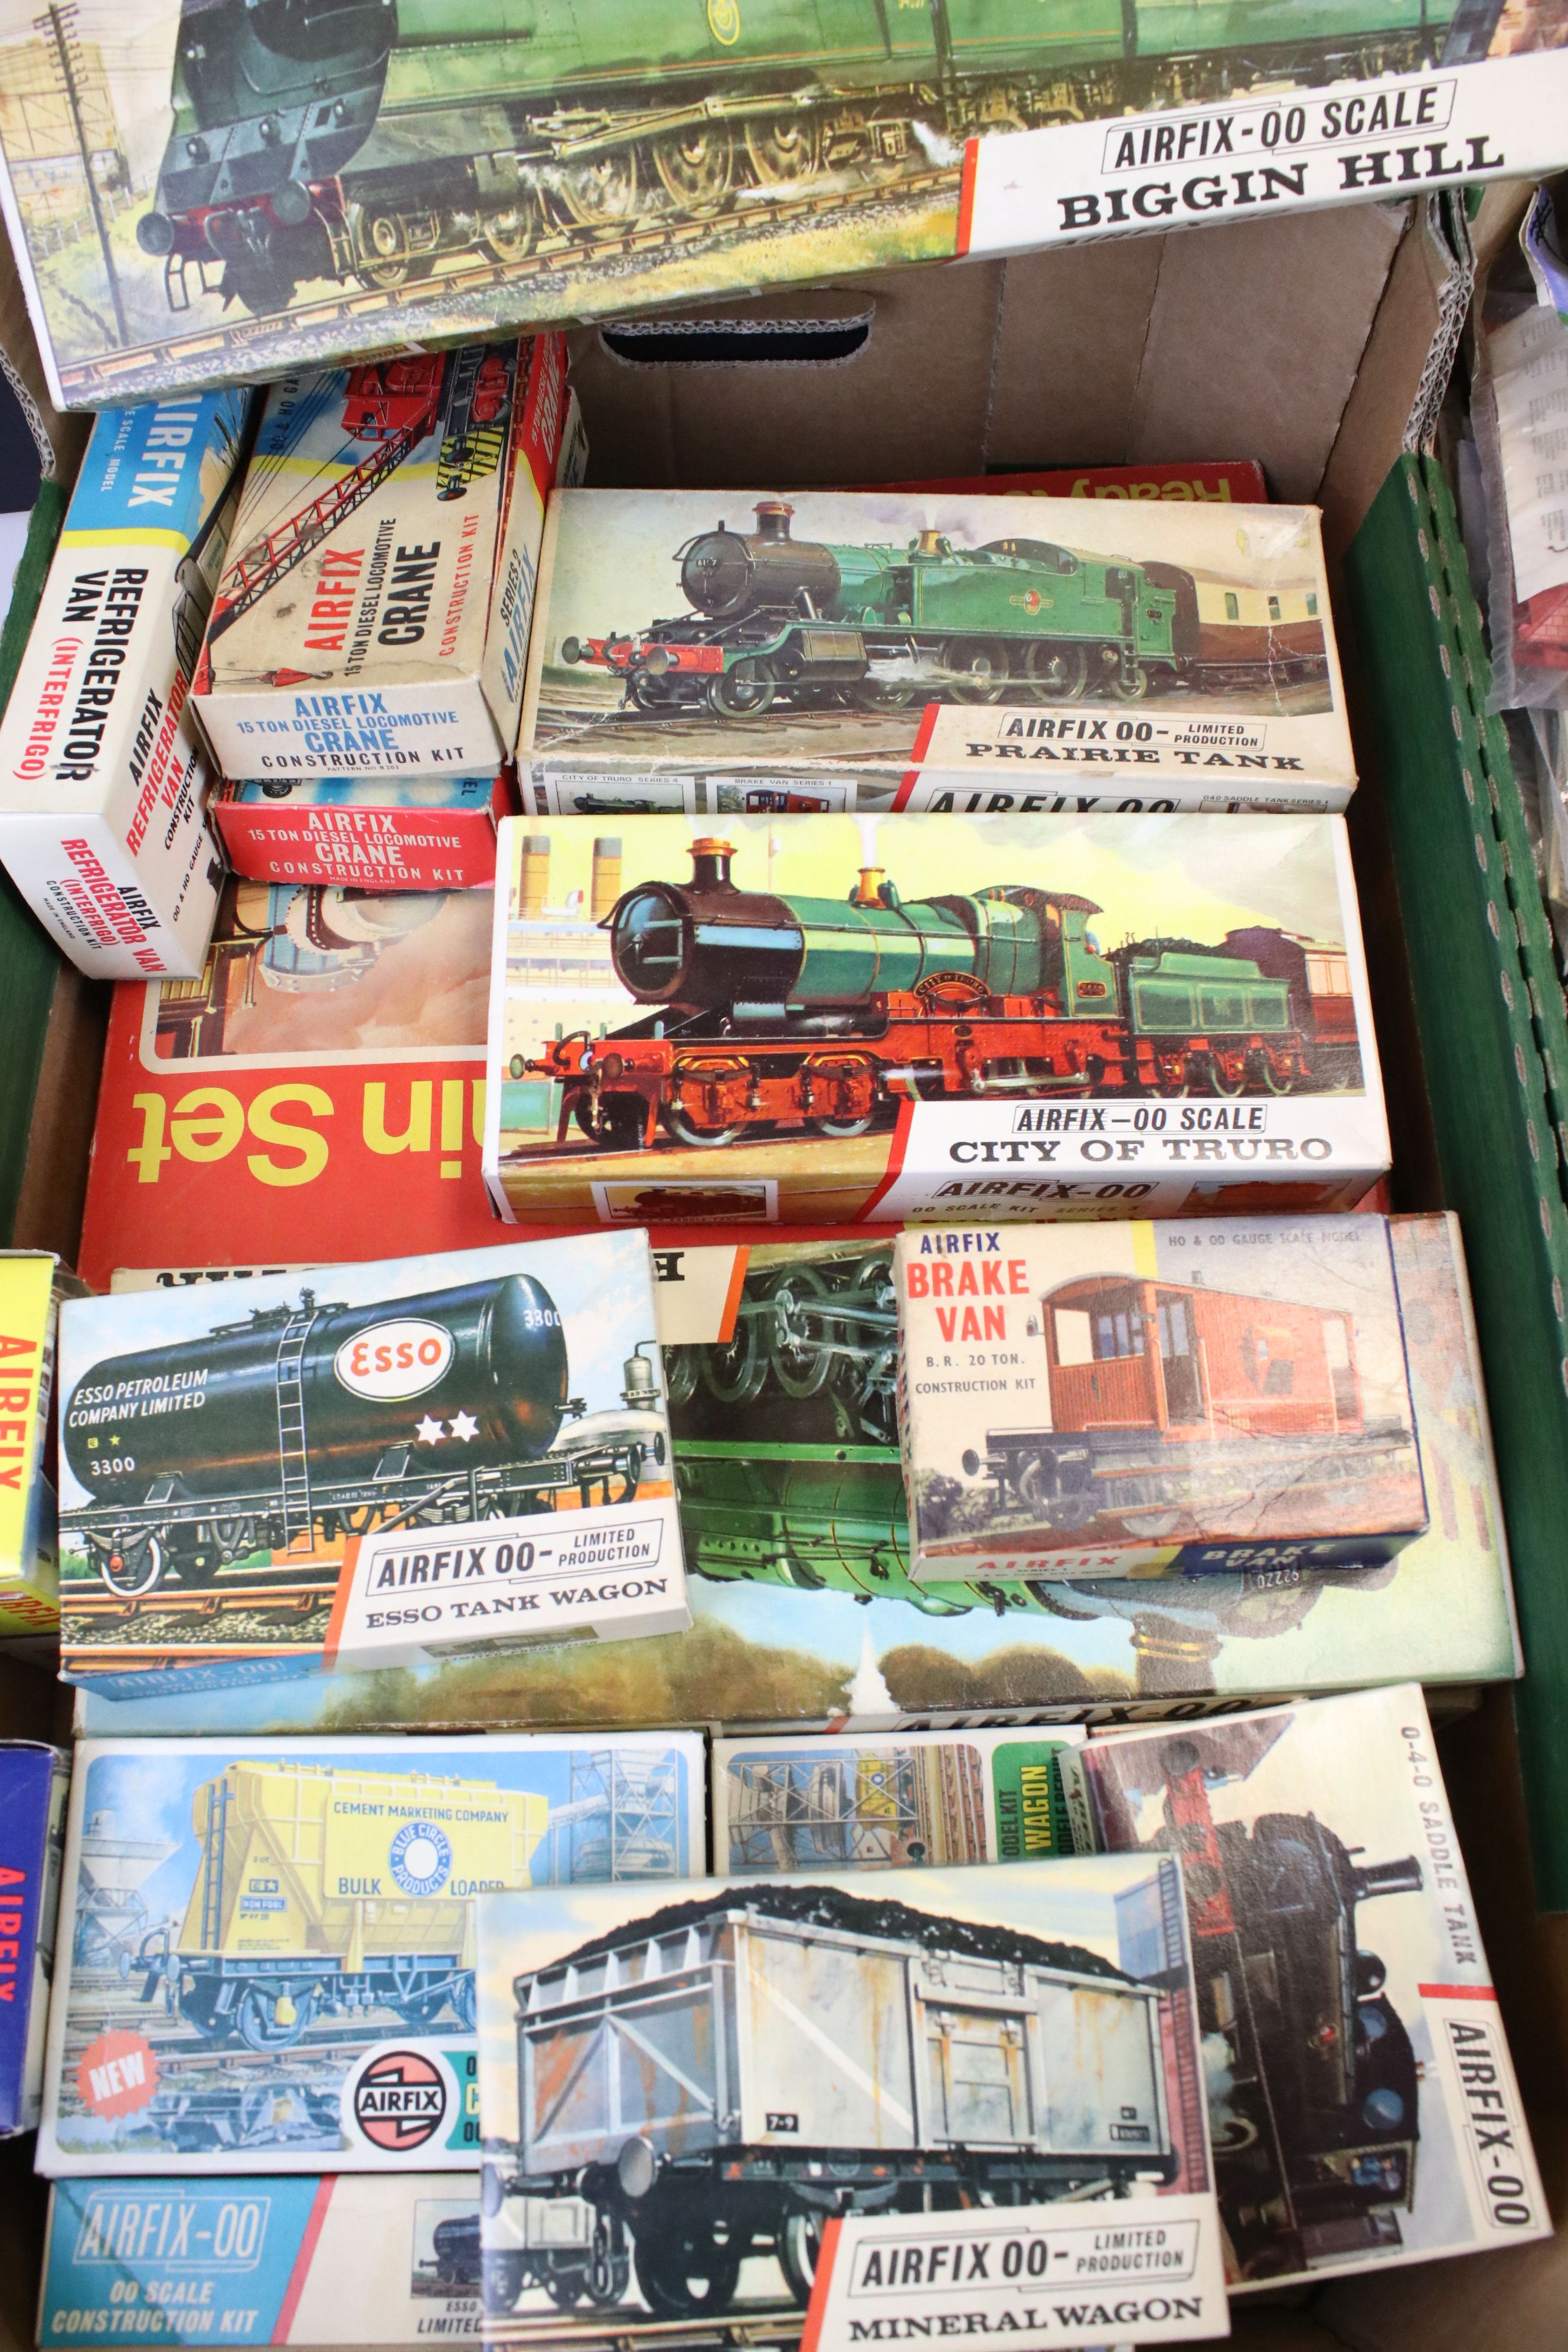 Airfix OO/HO - 44 Boxed & bagged Airfix plastic railway model kits to include 10 x locos (3 x 0-4- - Image 2 of 20